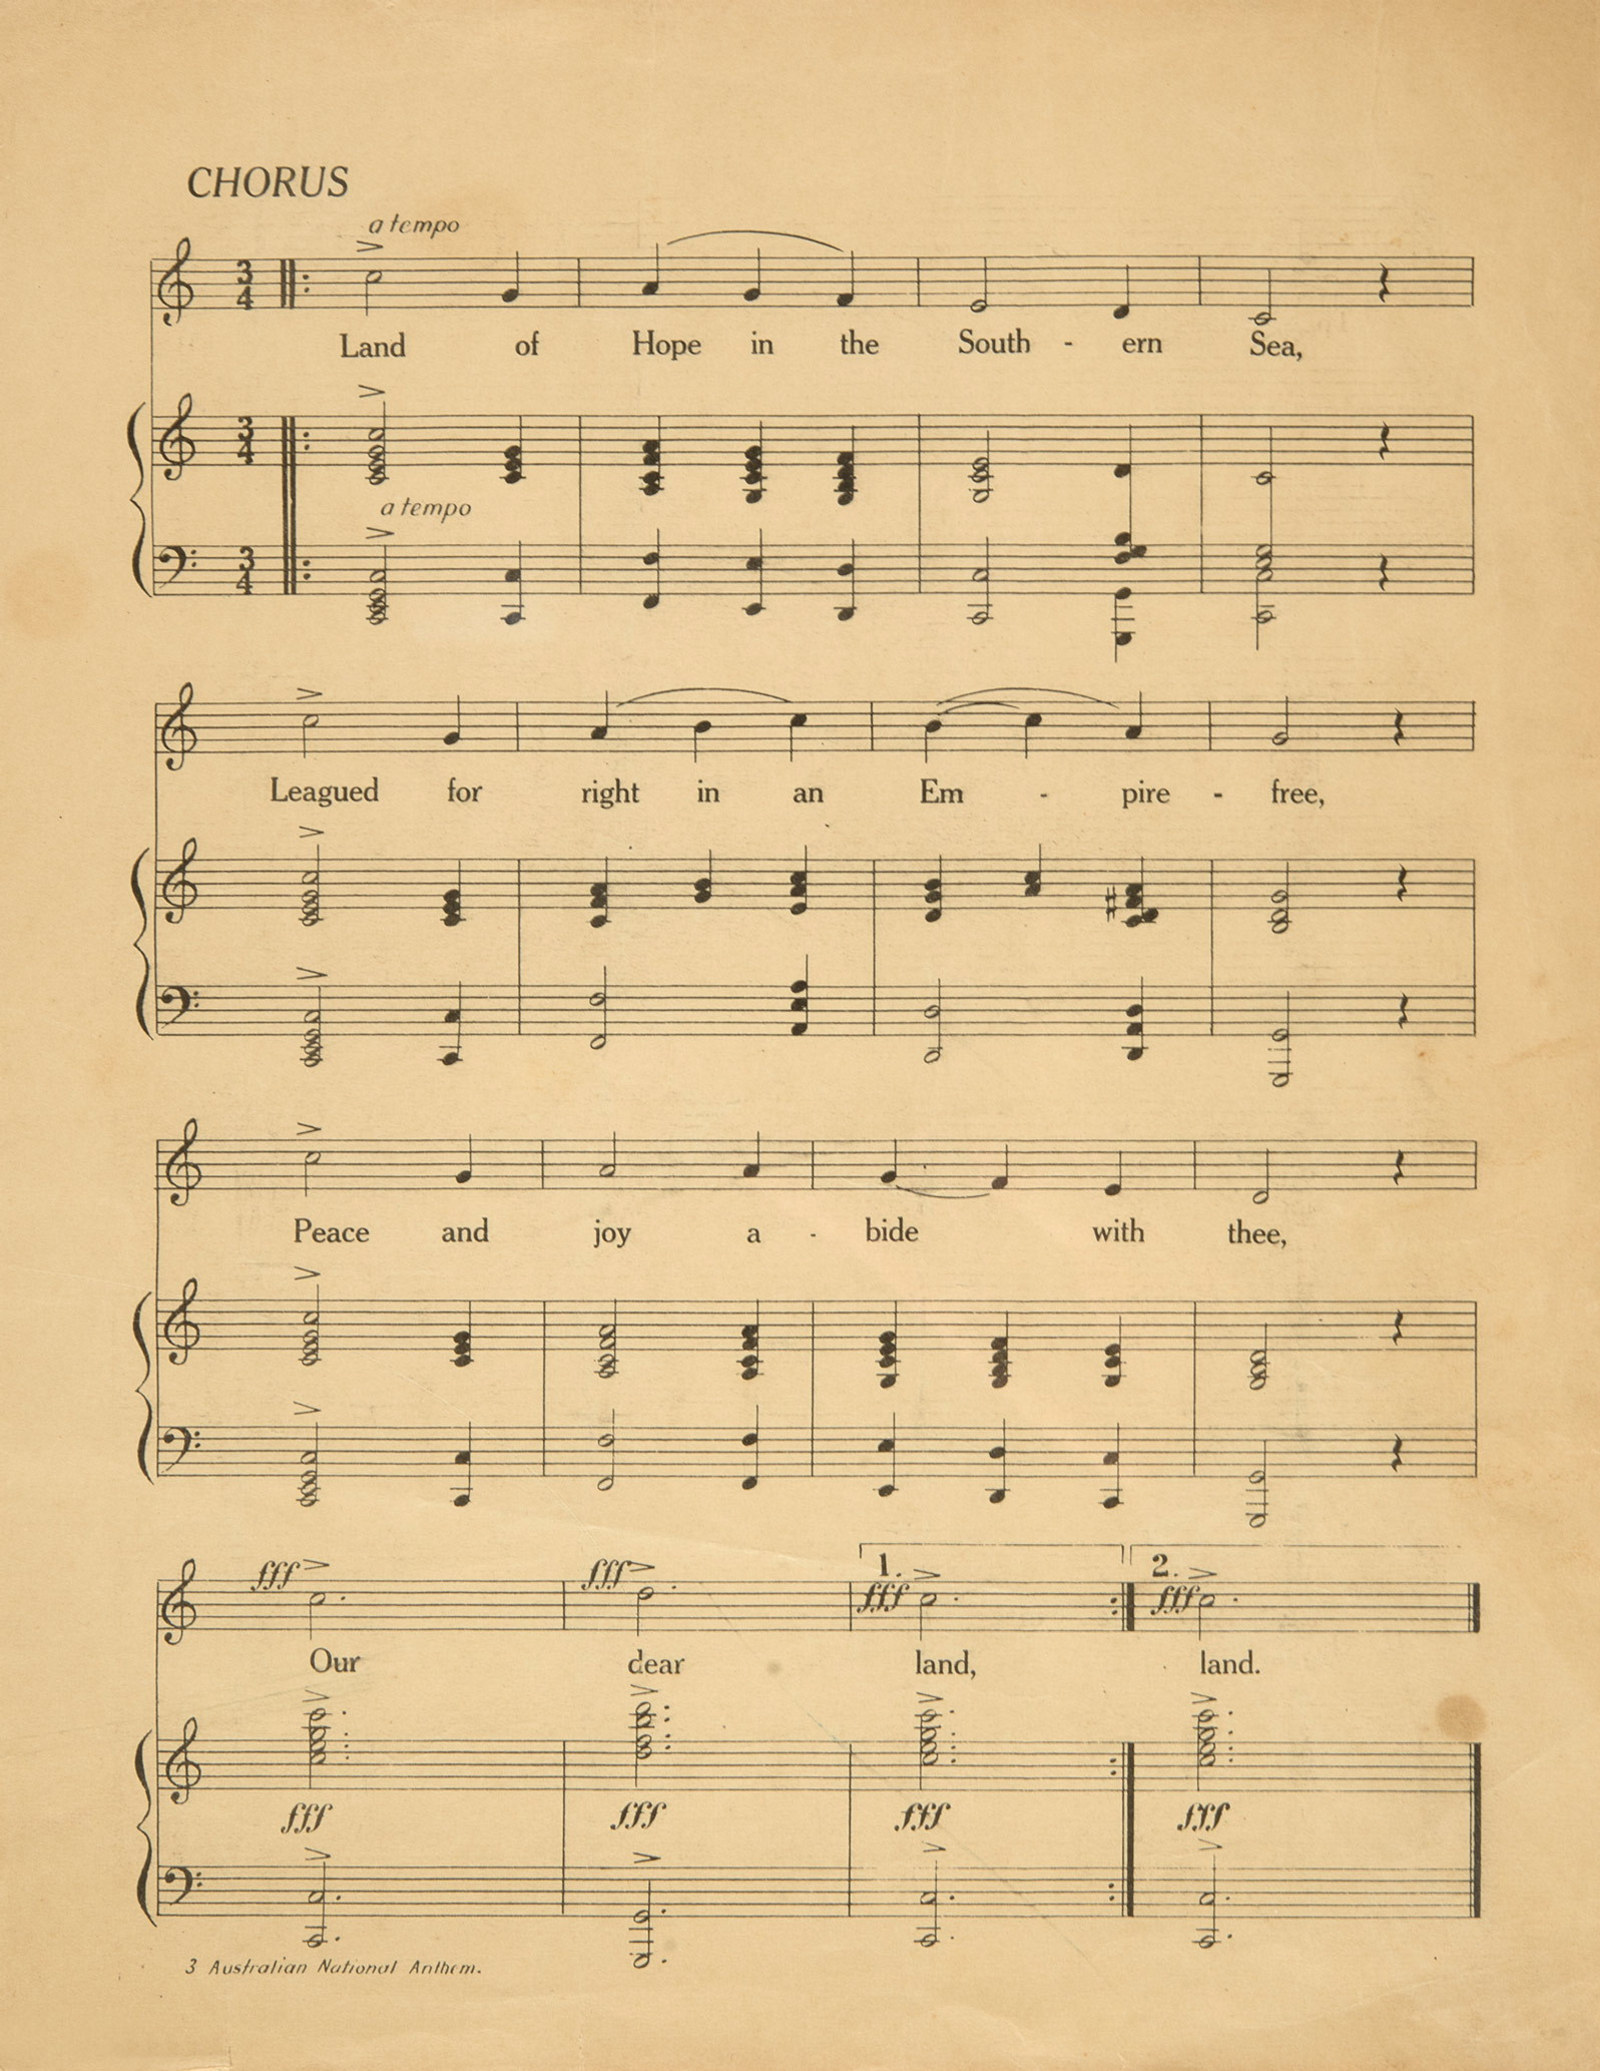 Sheet music,' Australian National Anthem', words and music by Lillian L. Dick, published 1934